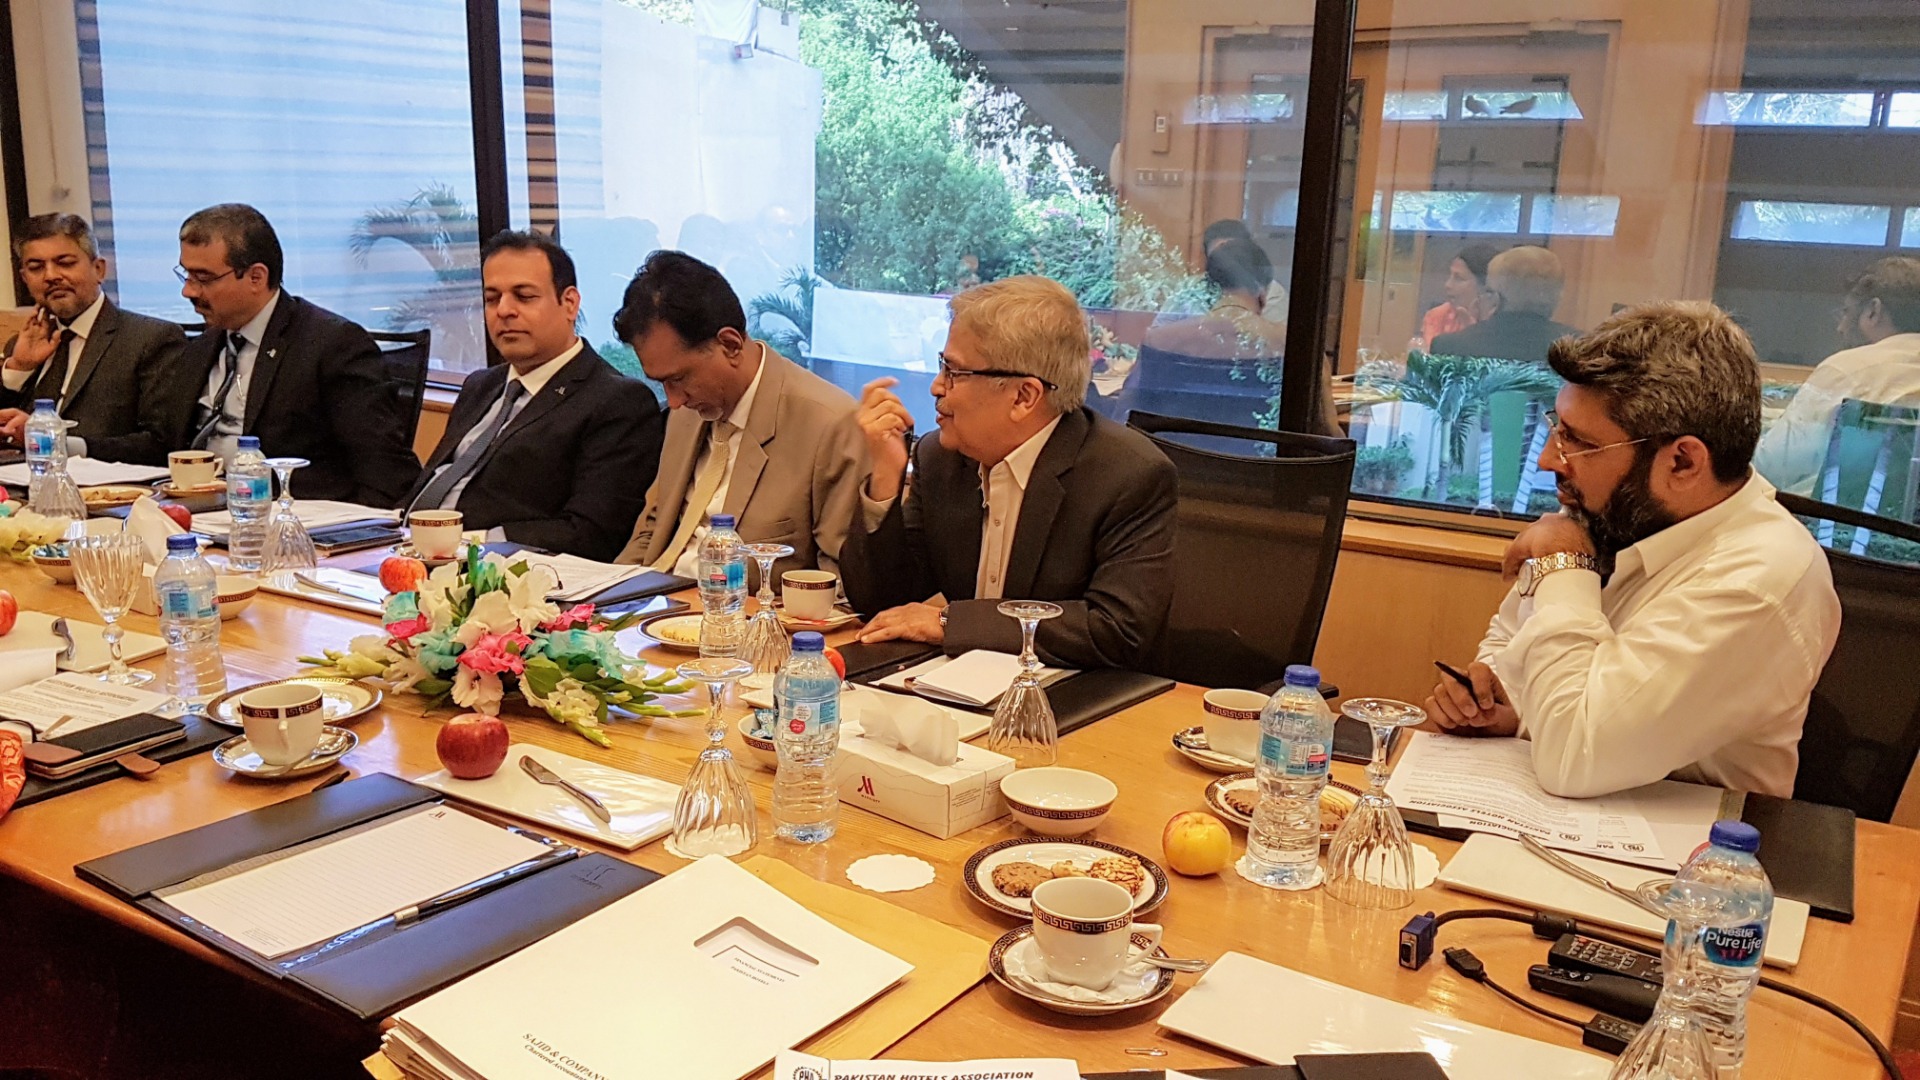 The 55th Annual General Meeting was held on 30-09-2019 at Karachi Marriott Hotel